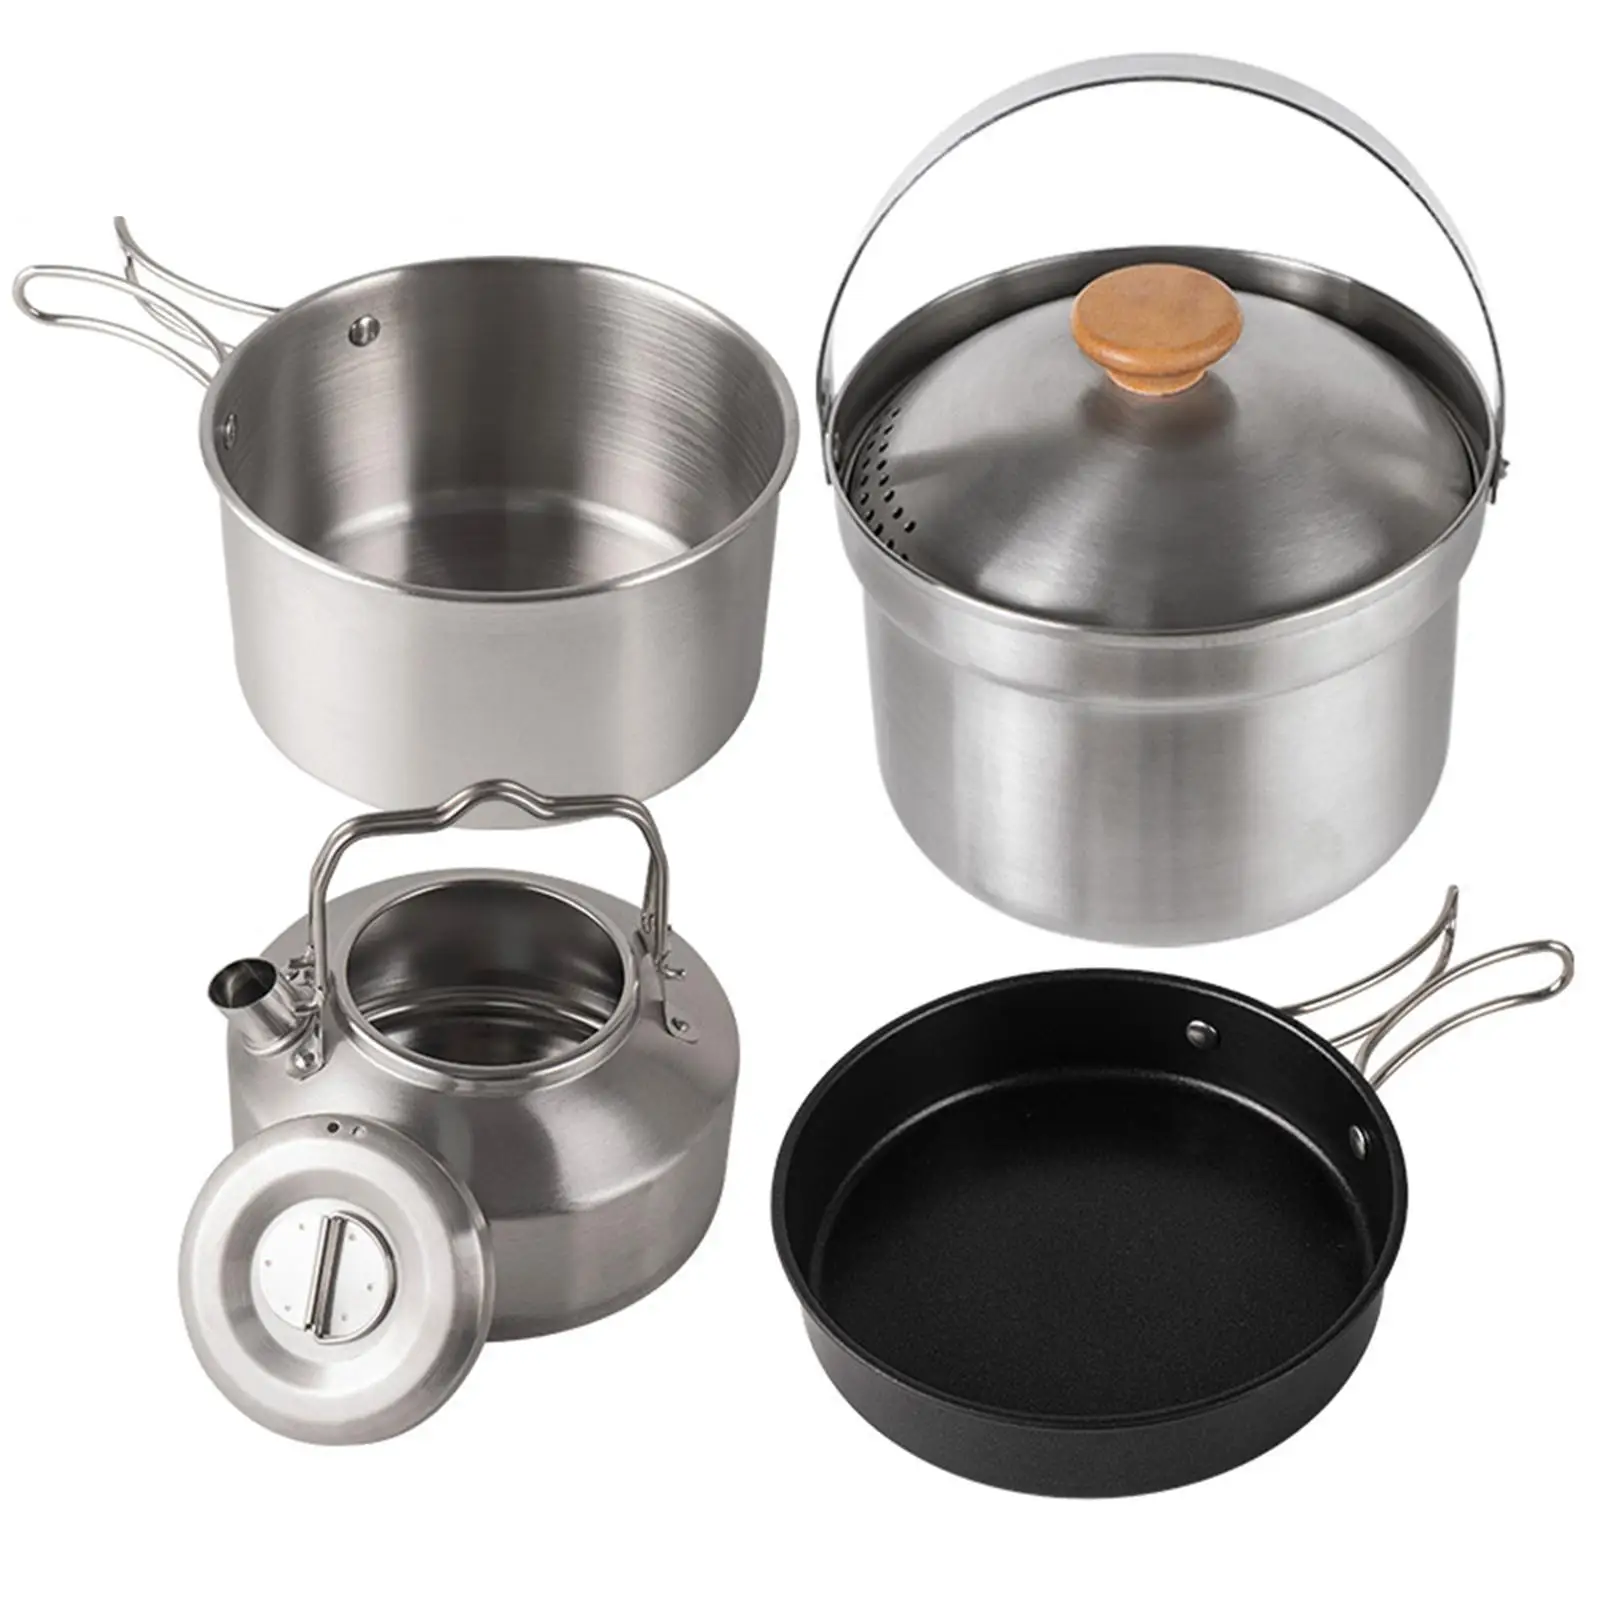 

Camping Cookware Set Stockpot Non Stick Saucepan Camping Pot and Pan kettle Pan for Cooking Camping Home Backpacking Travel